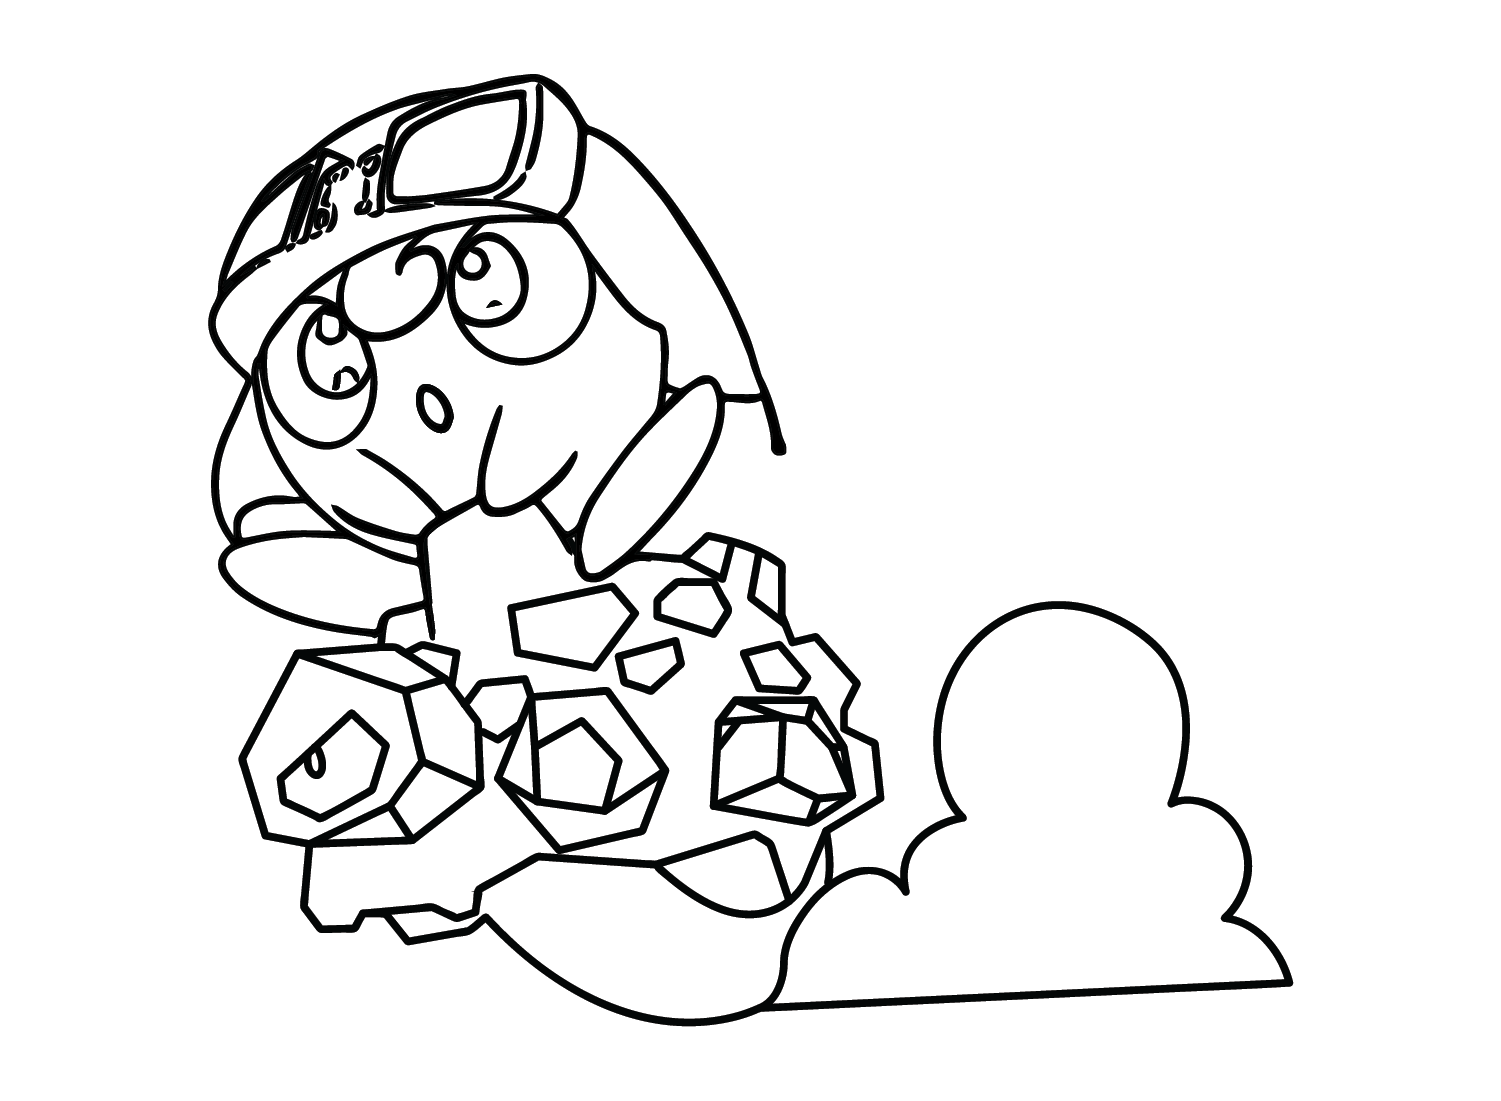 Rolycoly and Jigglypuff Coloring Page